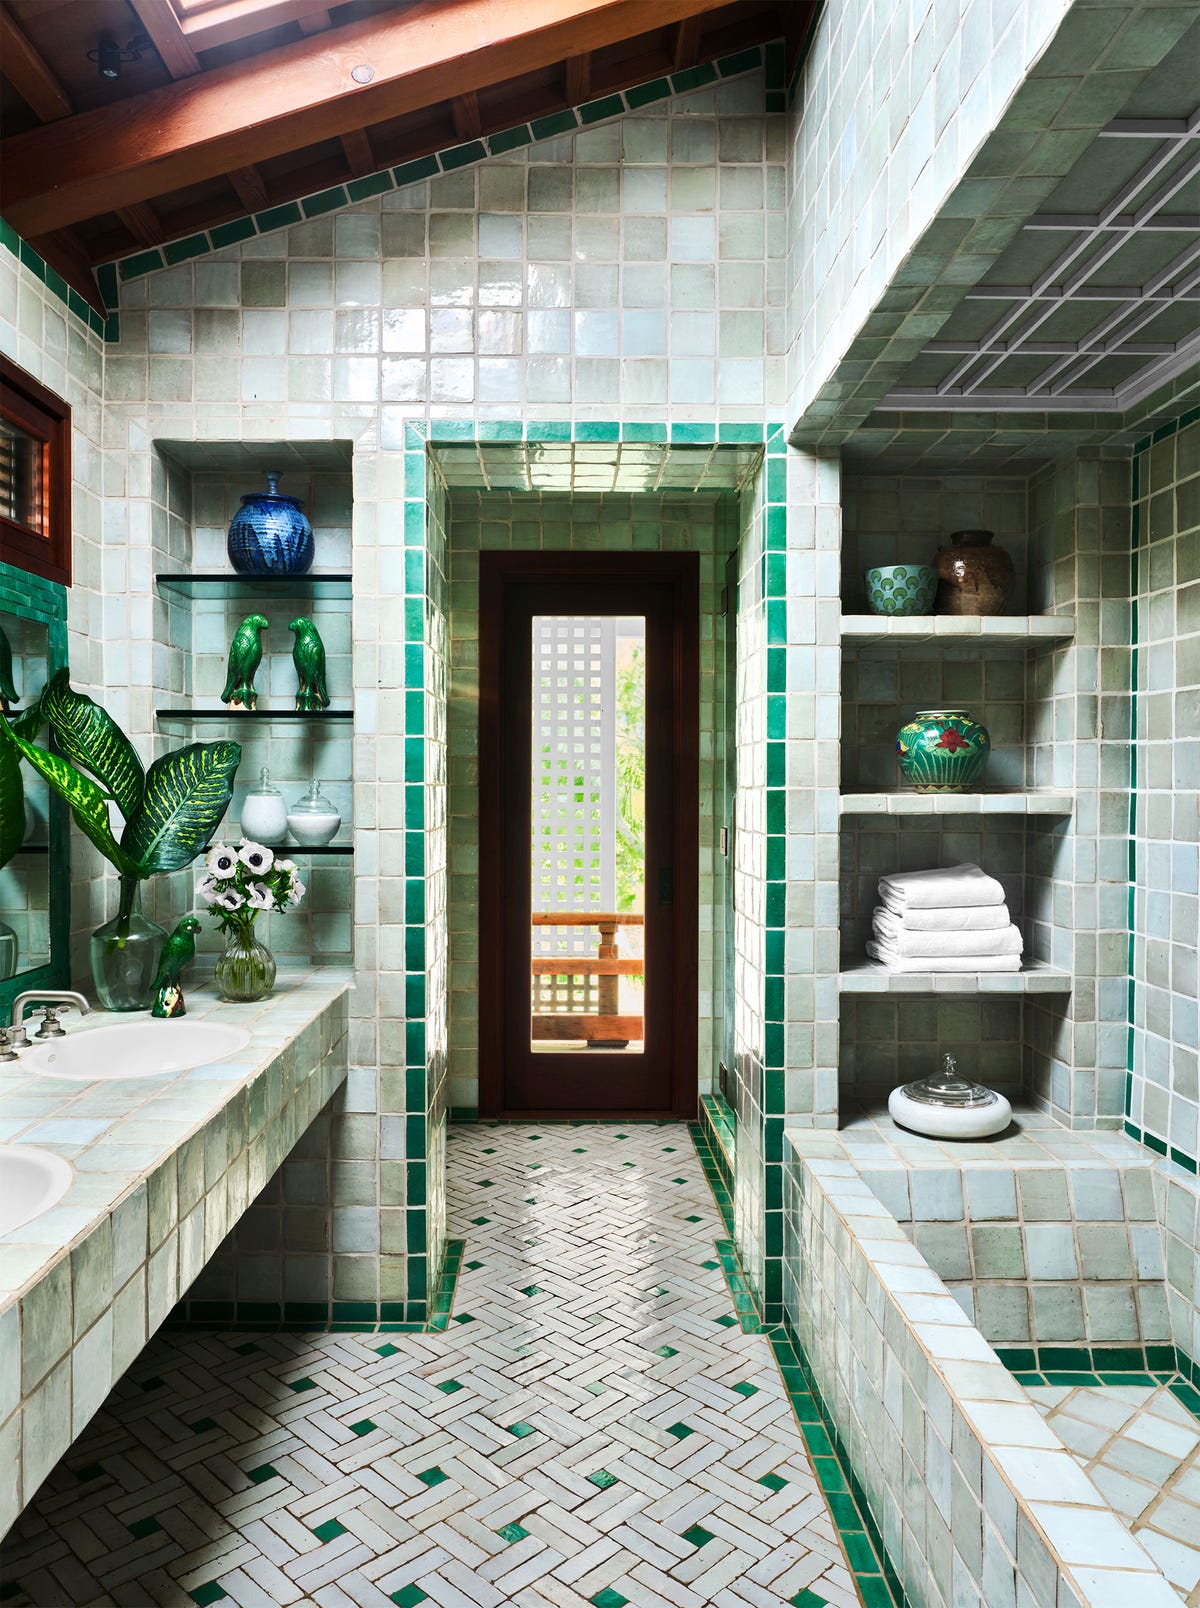 25 Shower Niche Ideas for Lathering Up in Style